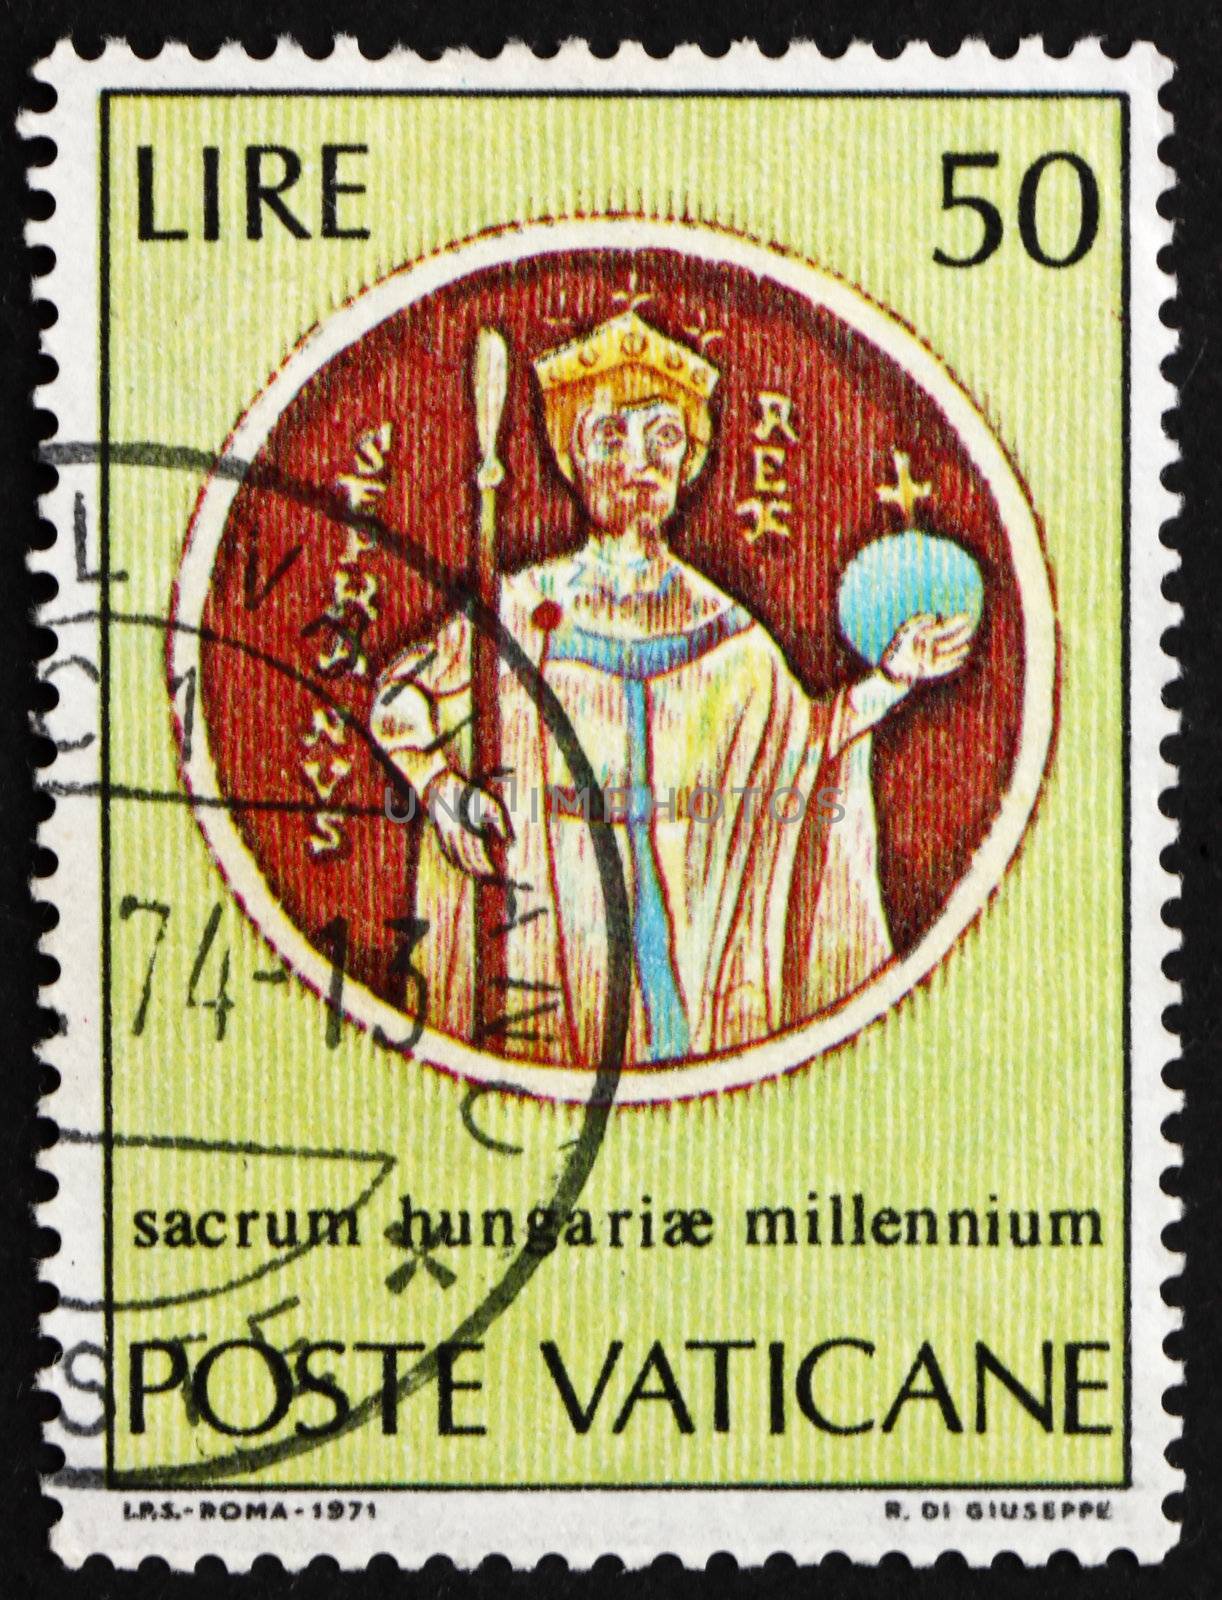 VATICAN - CIRCA 1971: a stamp printed in the Vatican shows St.Stephen, from Chasuble, Millenium of the Birth of St. Stephen, King of Hungary, circa 1971